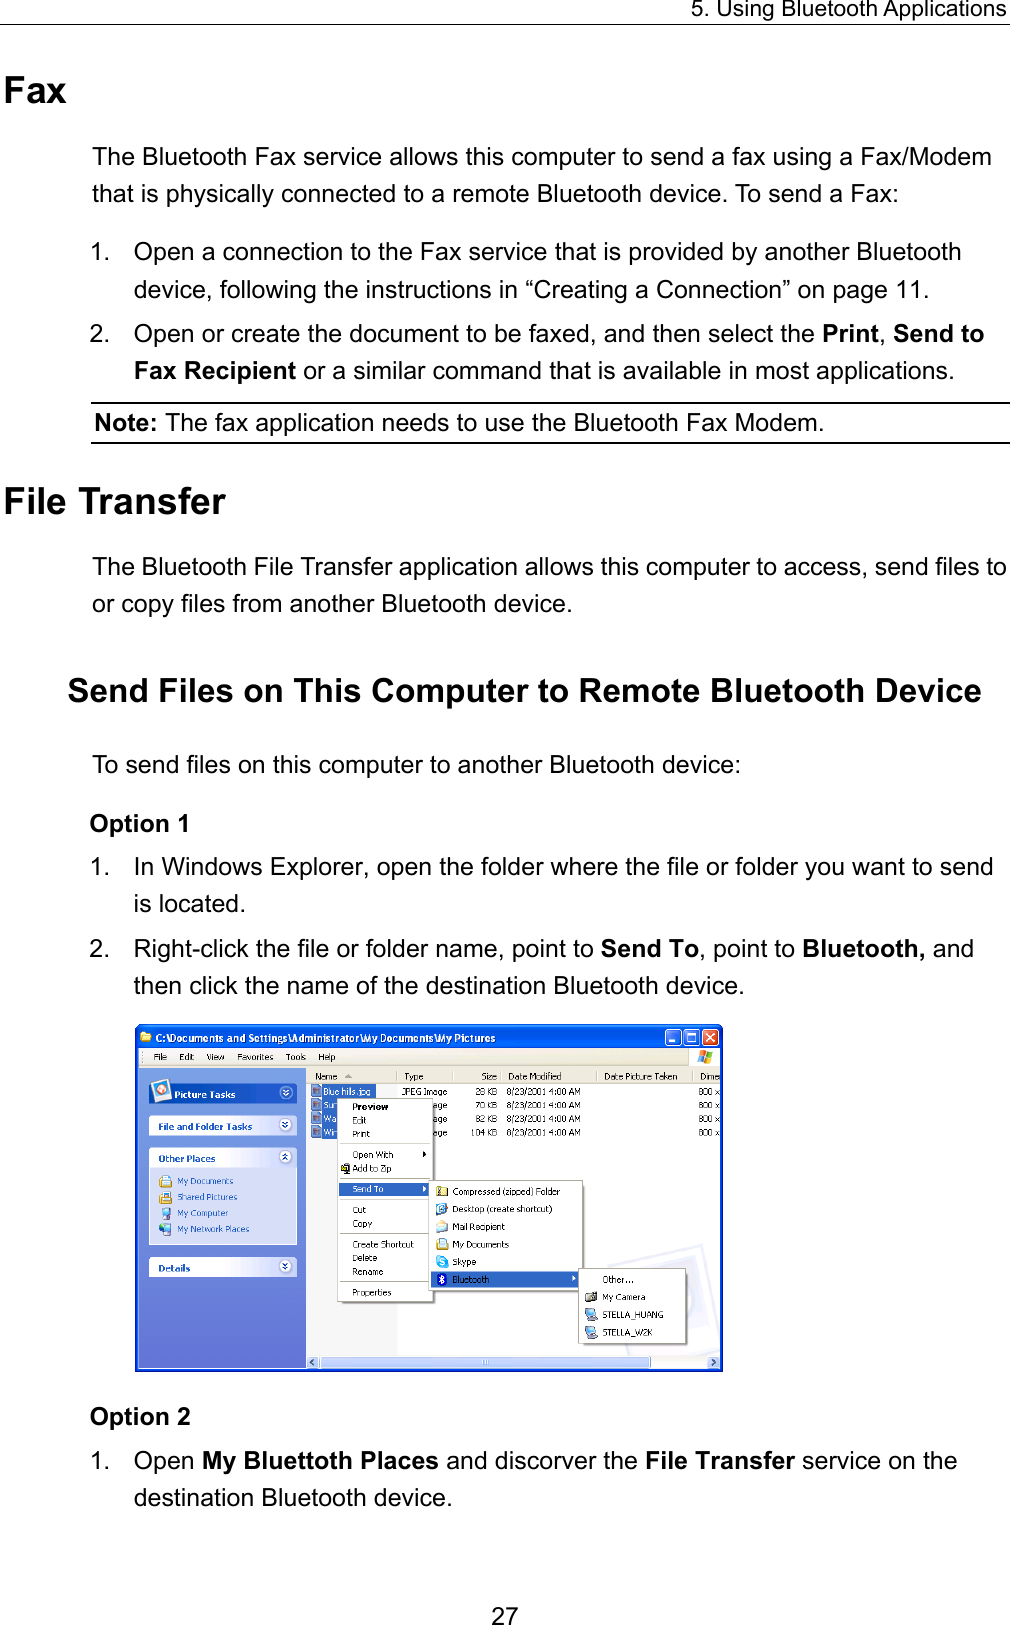 5. Using Bluetooth Applications 27 Fax The Bluetooth Fax service allows this computer to send a fax using a Fax/Modem that is physically connected to a remote Bluetooth device. To send a Fax: 1.  Open a connection to the Fax service that is provided by another Bluetooth device, following the instructions in “Creating a Connection” on page 11. 2.  Open or create the document to be faxed, and then select the Print, Send to Fax Recipient or a similar command that is available in most applications. Note: The fax application needs to use the Bluetooth Fax Modem. File Transfer The Bluetooth File Transfer application allows this computer to access, send files to or copy files from another Bluetooth device. Send Files on This Computer to Remote Bluetooth Device To send files on this computer to another Bluetooth device: Option 1 1.  In Windows Explorer, open the folder where the file or folder you want to send is located.   2.  Right-click the file or folder name, point to Send To, point to Bluetooth, and then click the name of the destination Bluetooth device.    Option 2 1. Open My Bluettoth Places and discorver the File Transfer service on the destination Bluetooth device.   